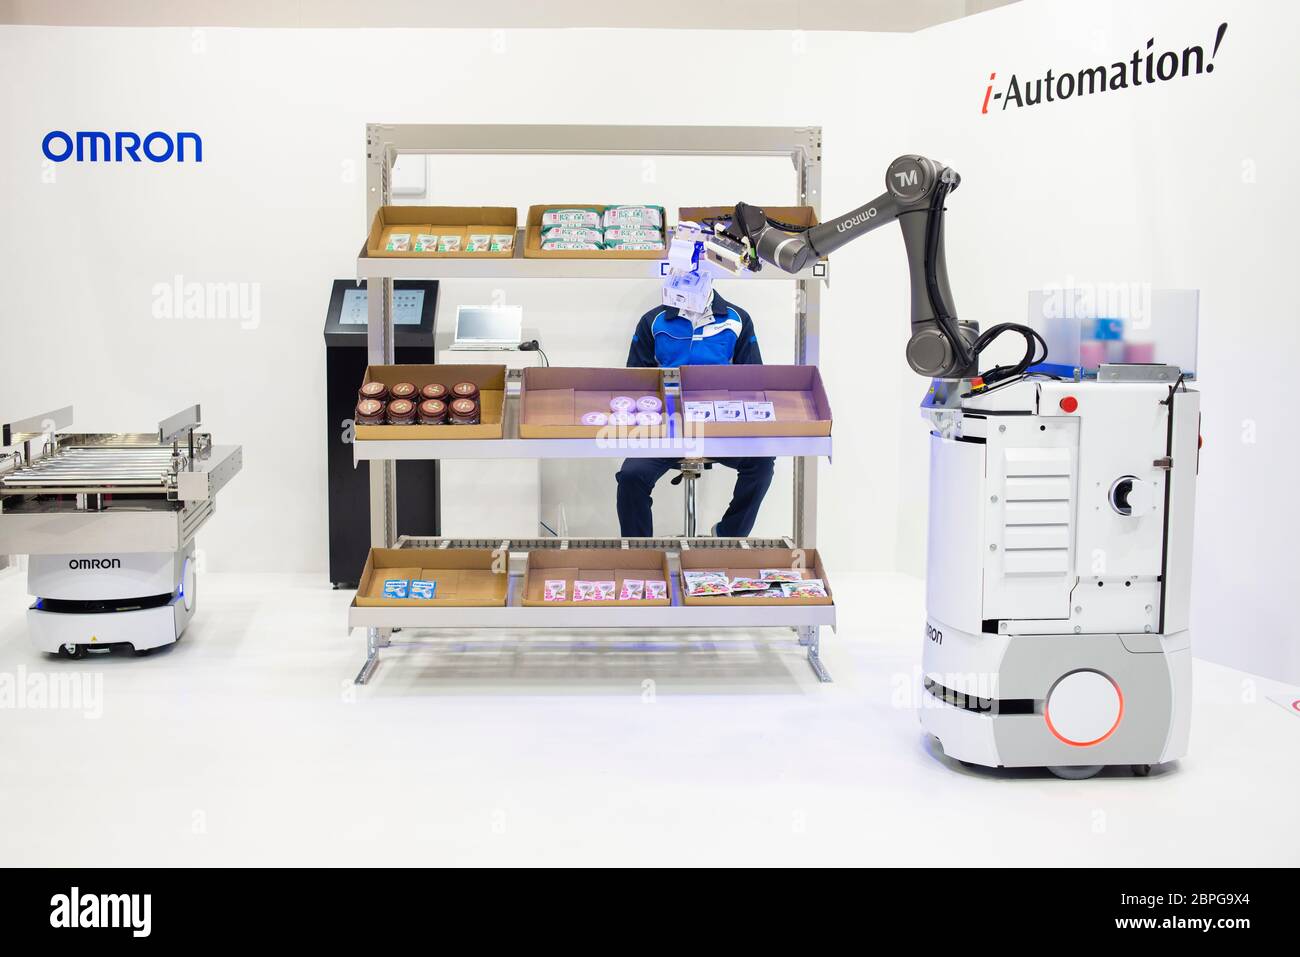 https://c8.alamy.com/comp/2BPG9X4/a-robot-omron-automation-during-the-japan-robot-week-exhibition-in-tokyo-japan-japan-robot-week-is-a-trade-show-specialized-in-service-robots-and-robot-related-technologies-this-event-aims-to-create-the-future-business-opportunity-by-introducing-research-development-and-manufacturing-of-robots-utilized-in-various-scenes-and-robotic-system-integration-2BPG9X4.jpg